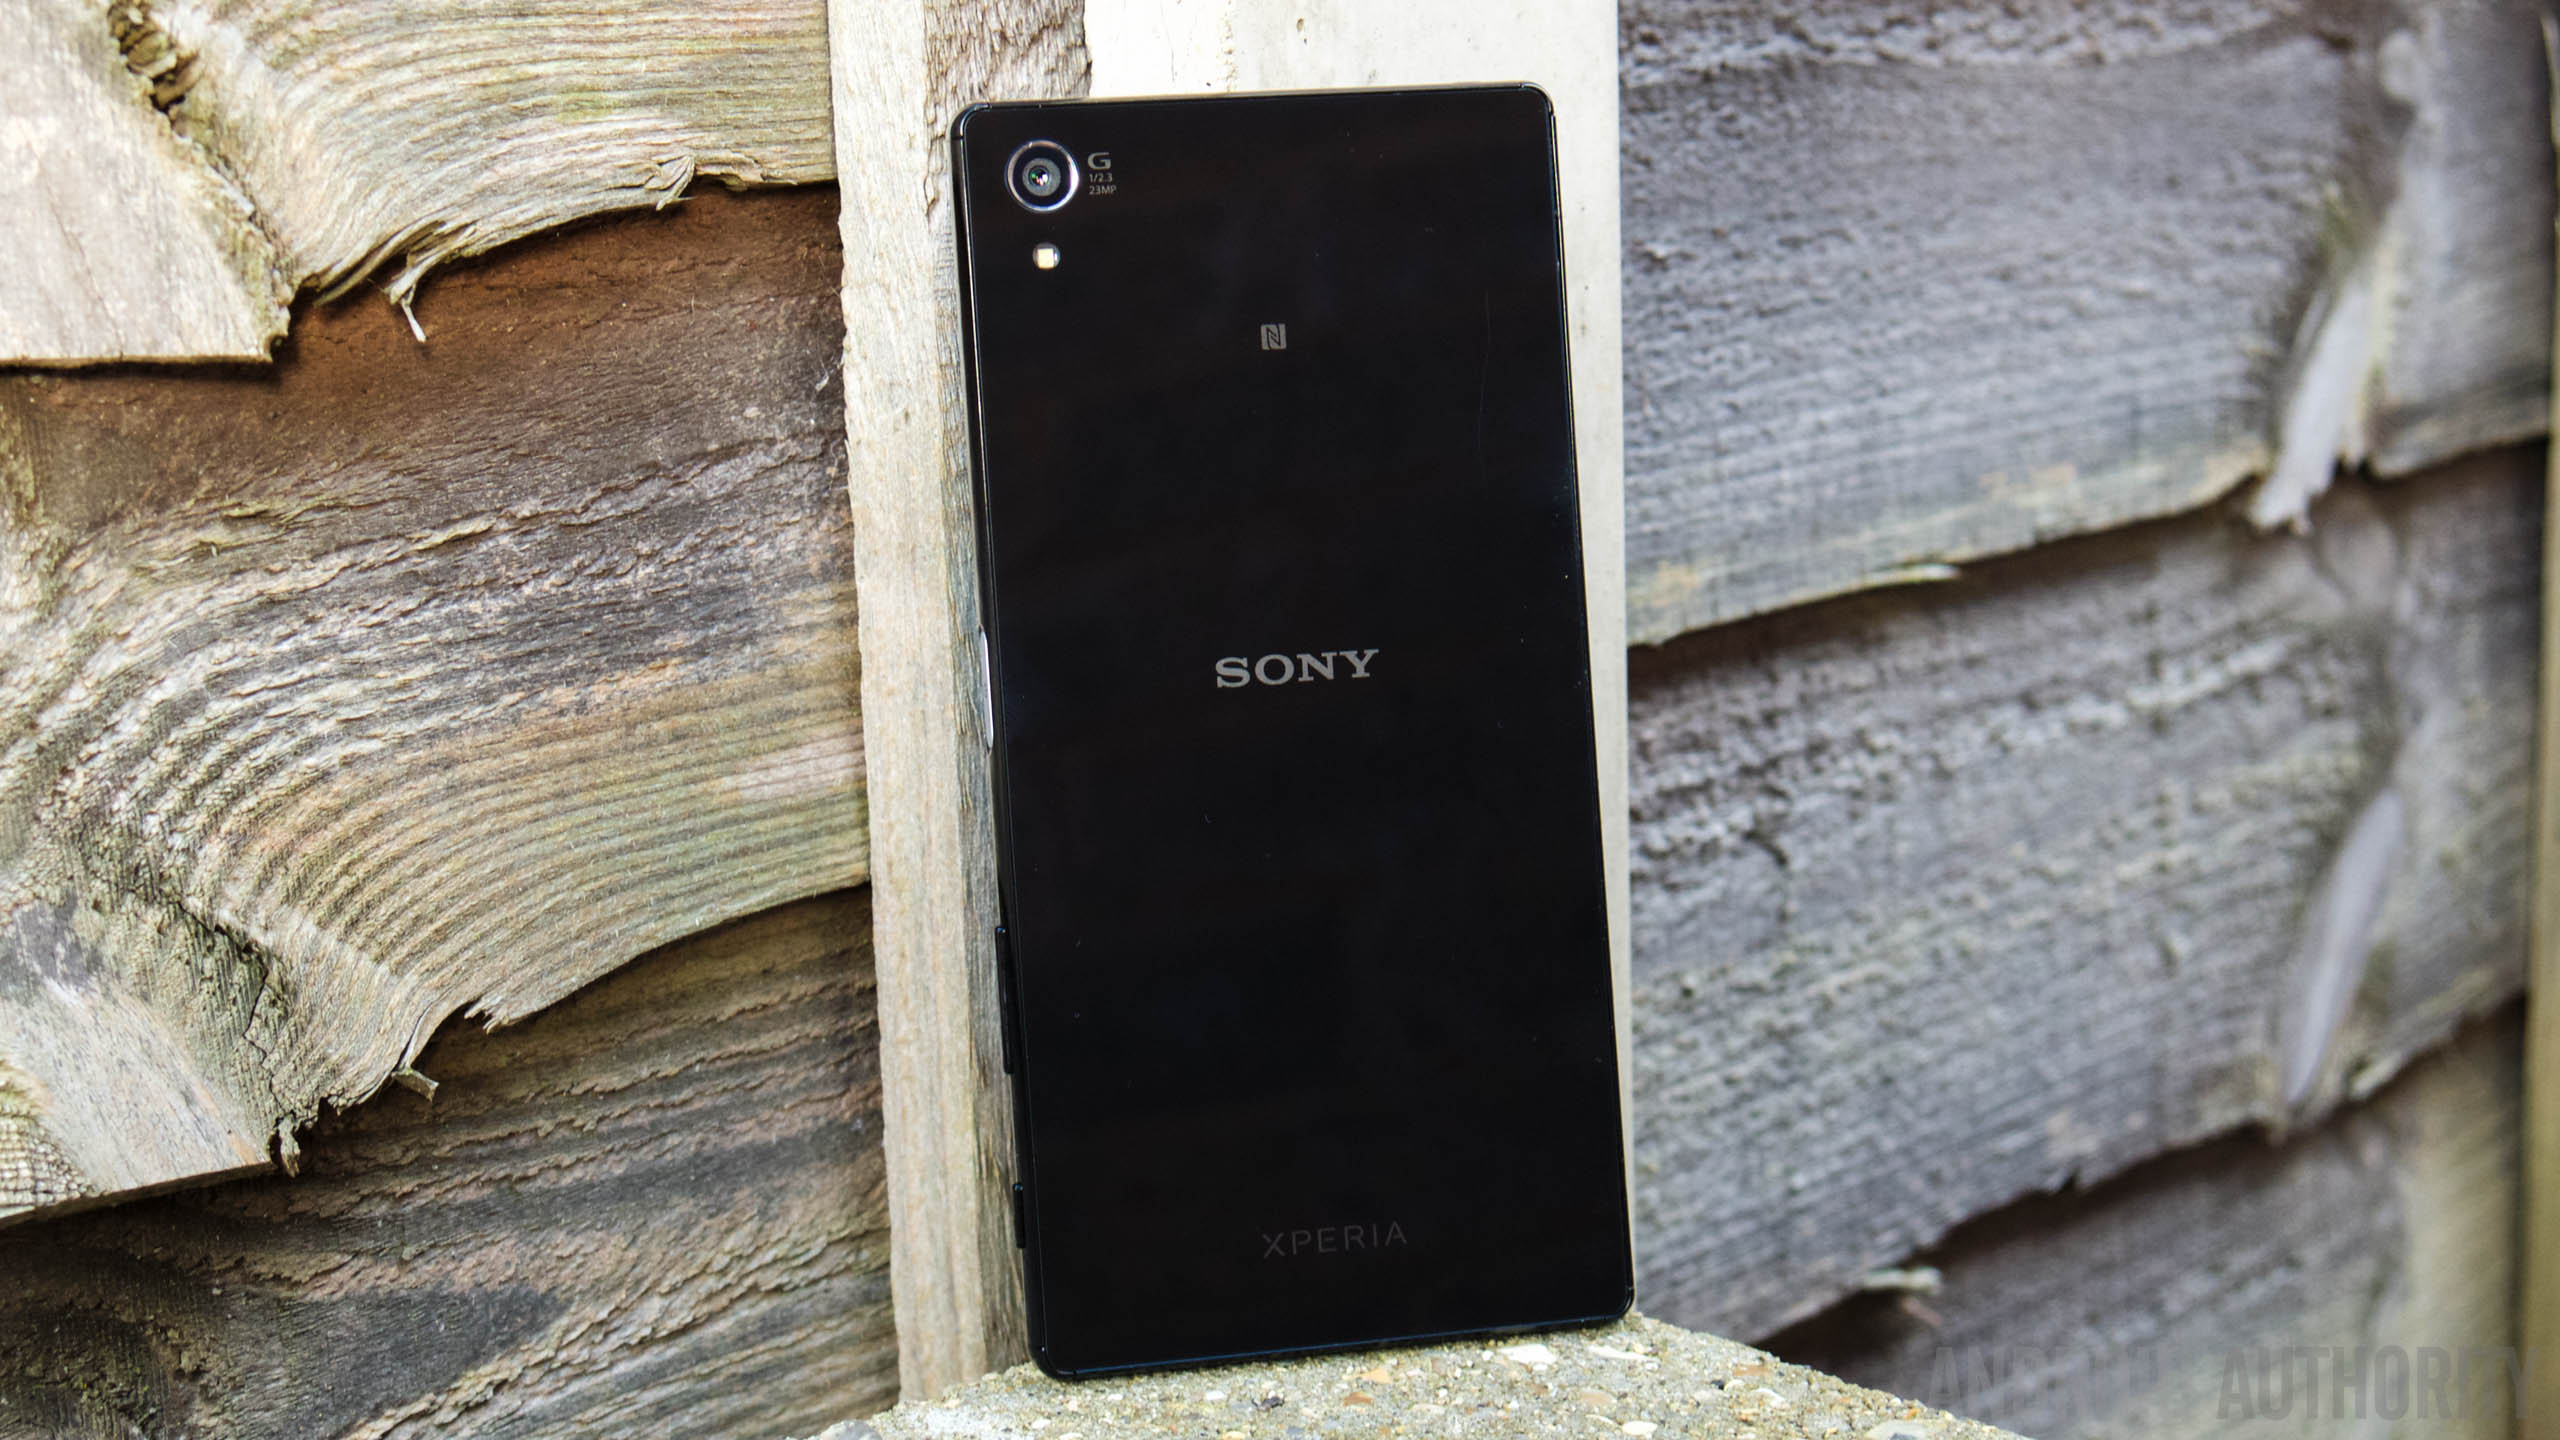 Sony Xperia Z5 review - Android Authority